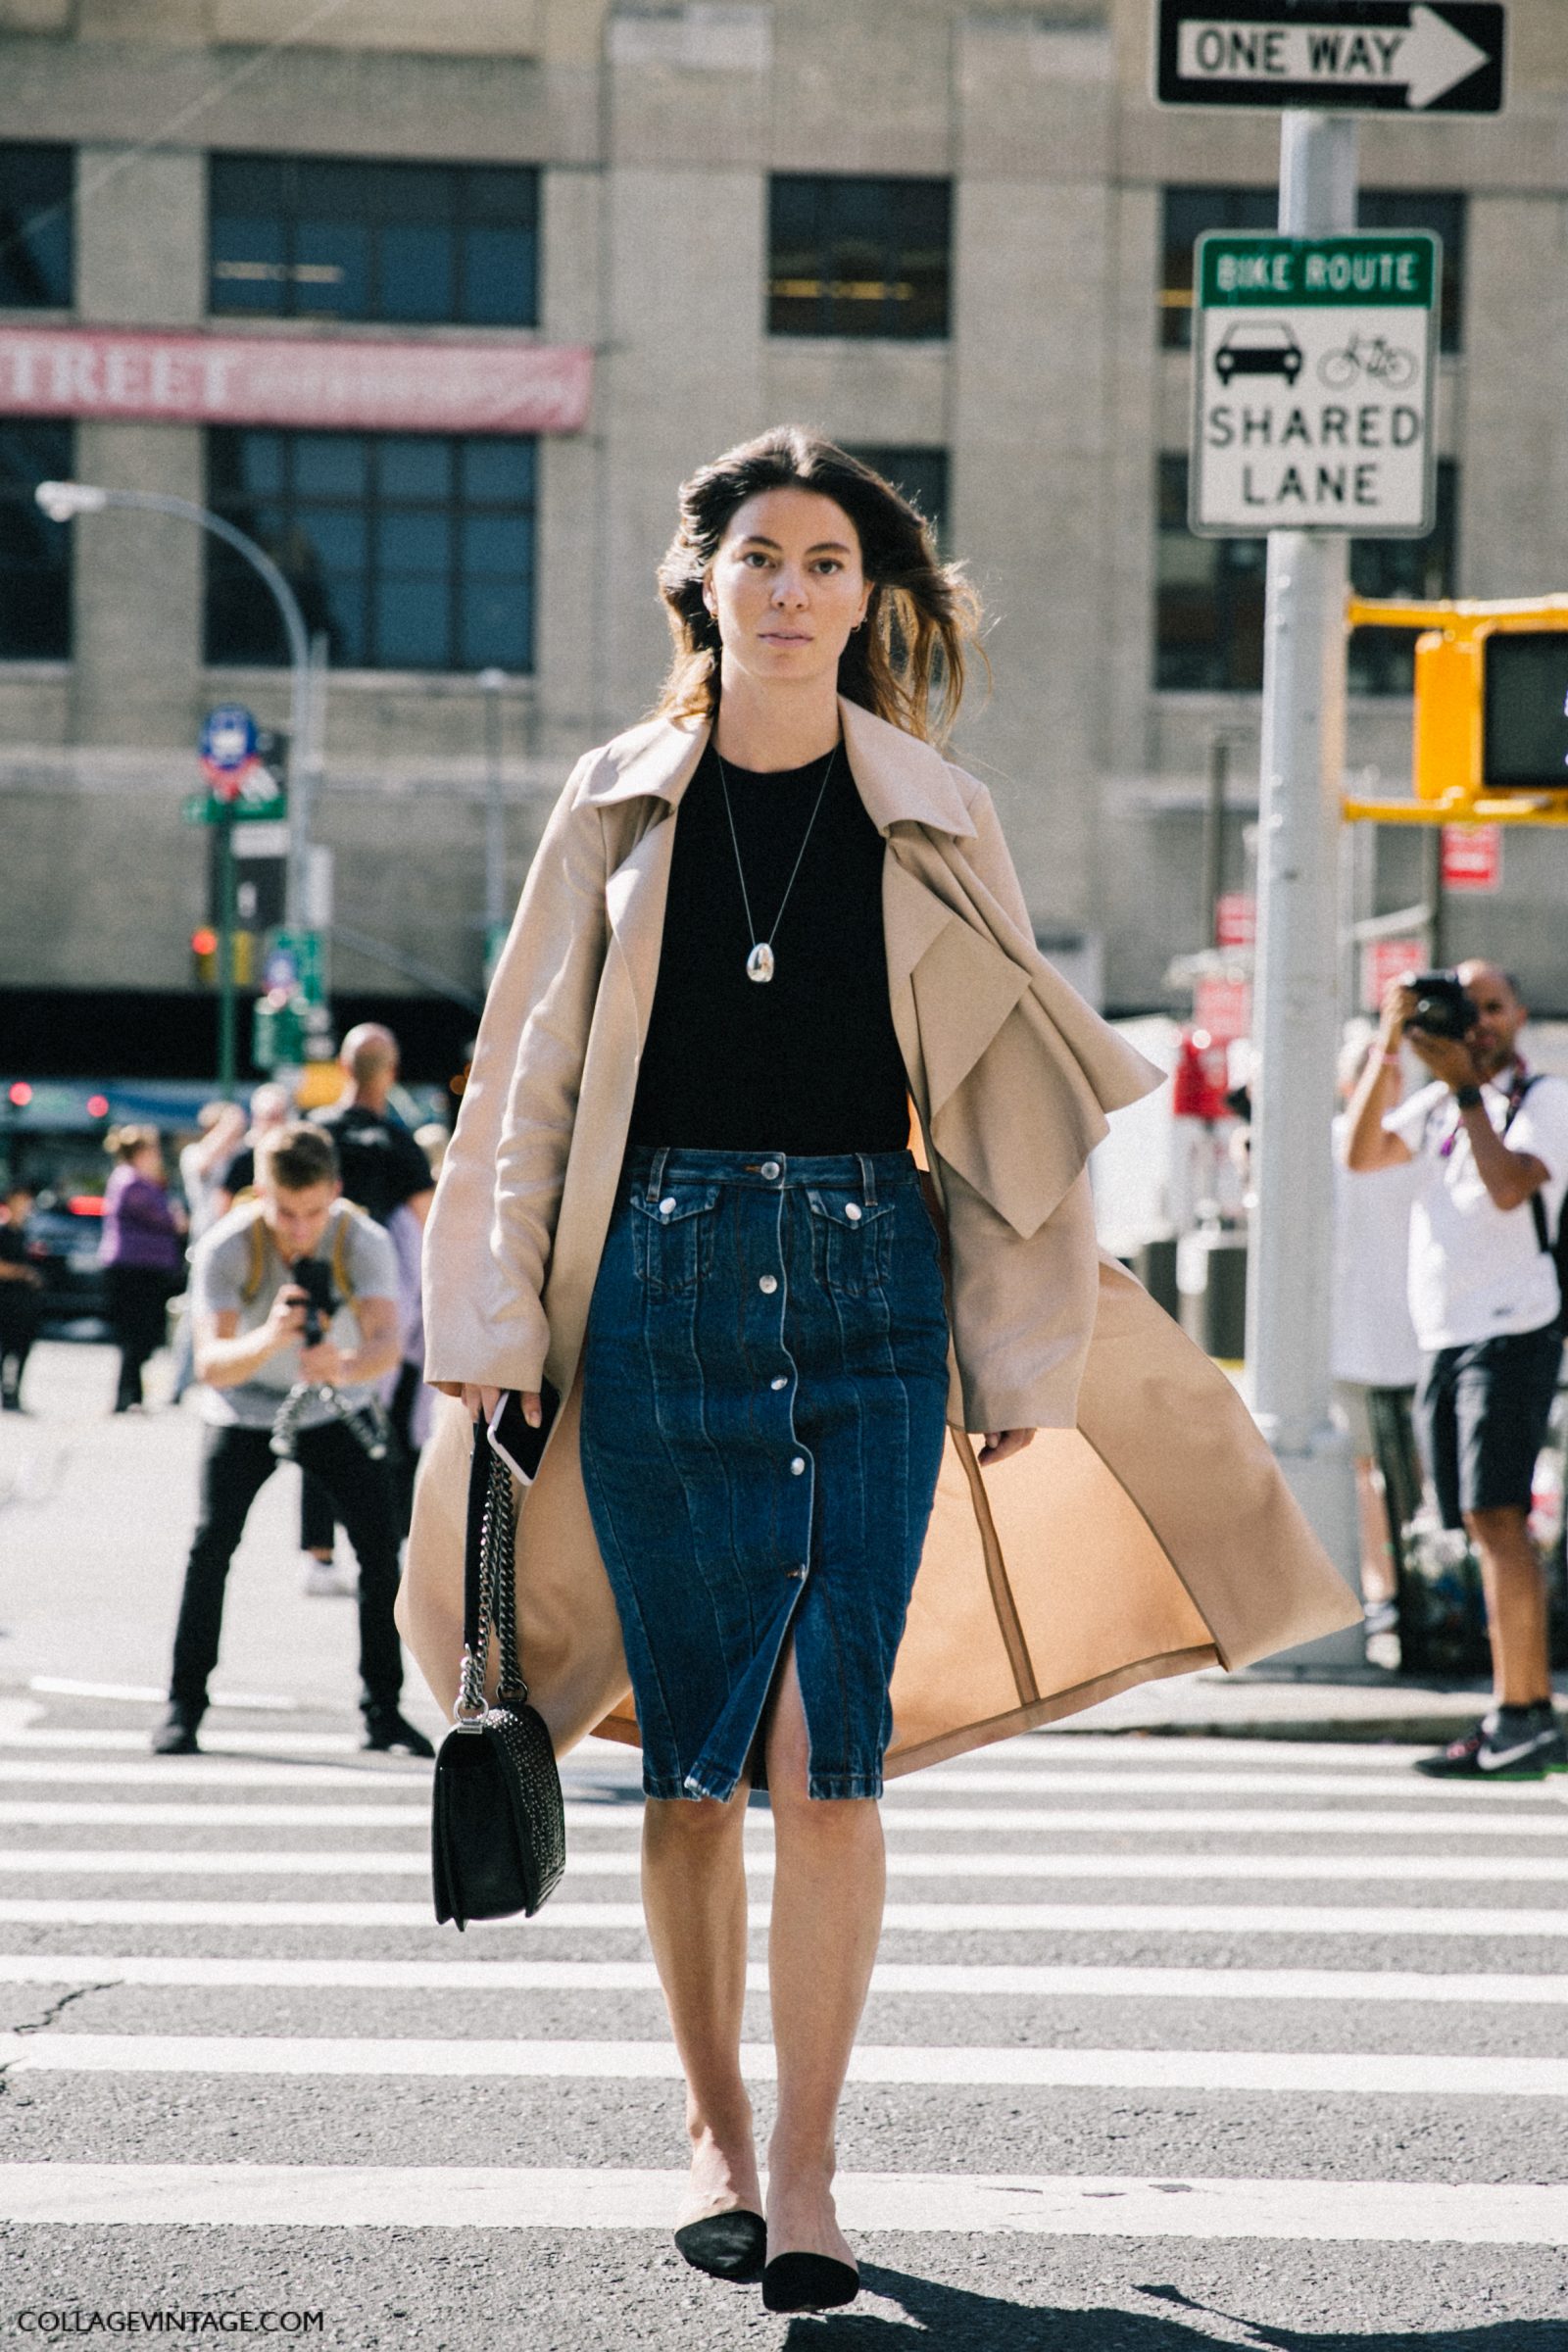 nyfw-new_york_fashion_week_ss17-street_style-outfits-collage_vintage-vintage-phillip_lim-the-row-proenza_schouler-rossie_aussolin-353